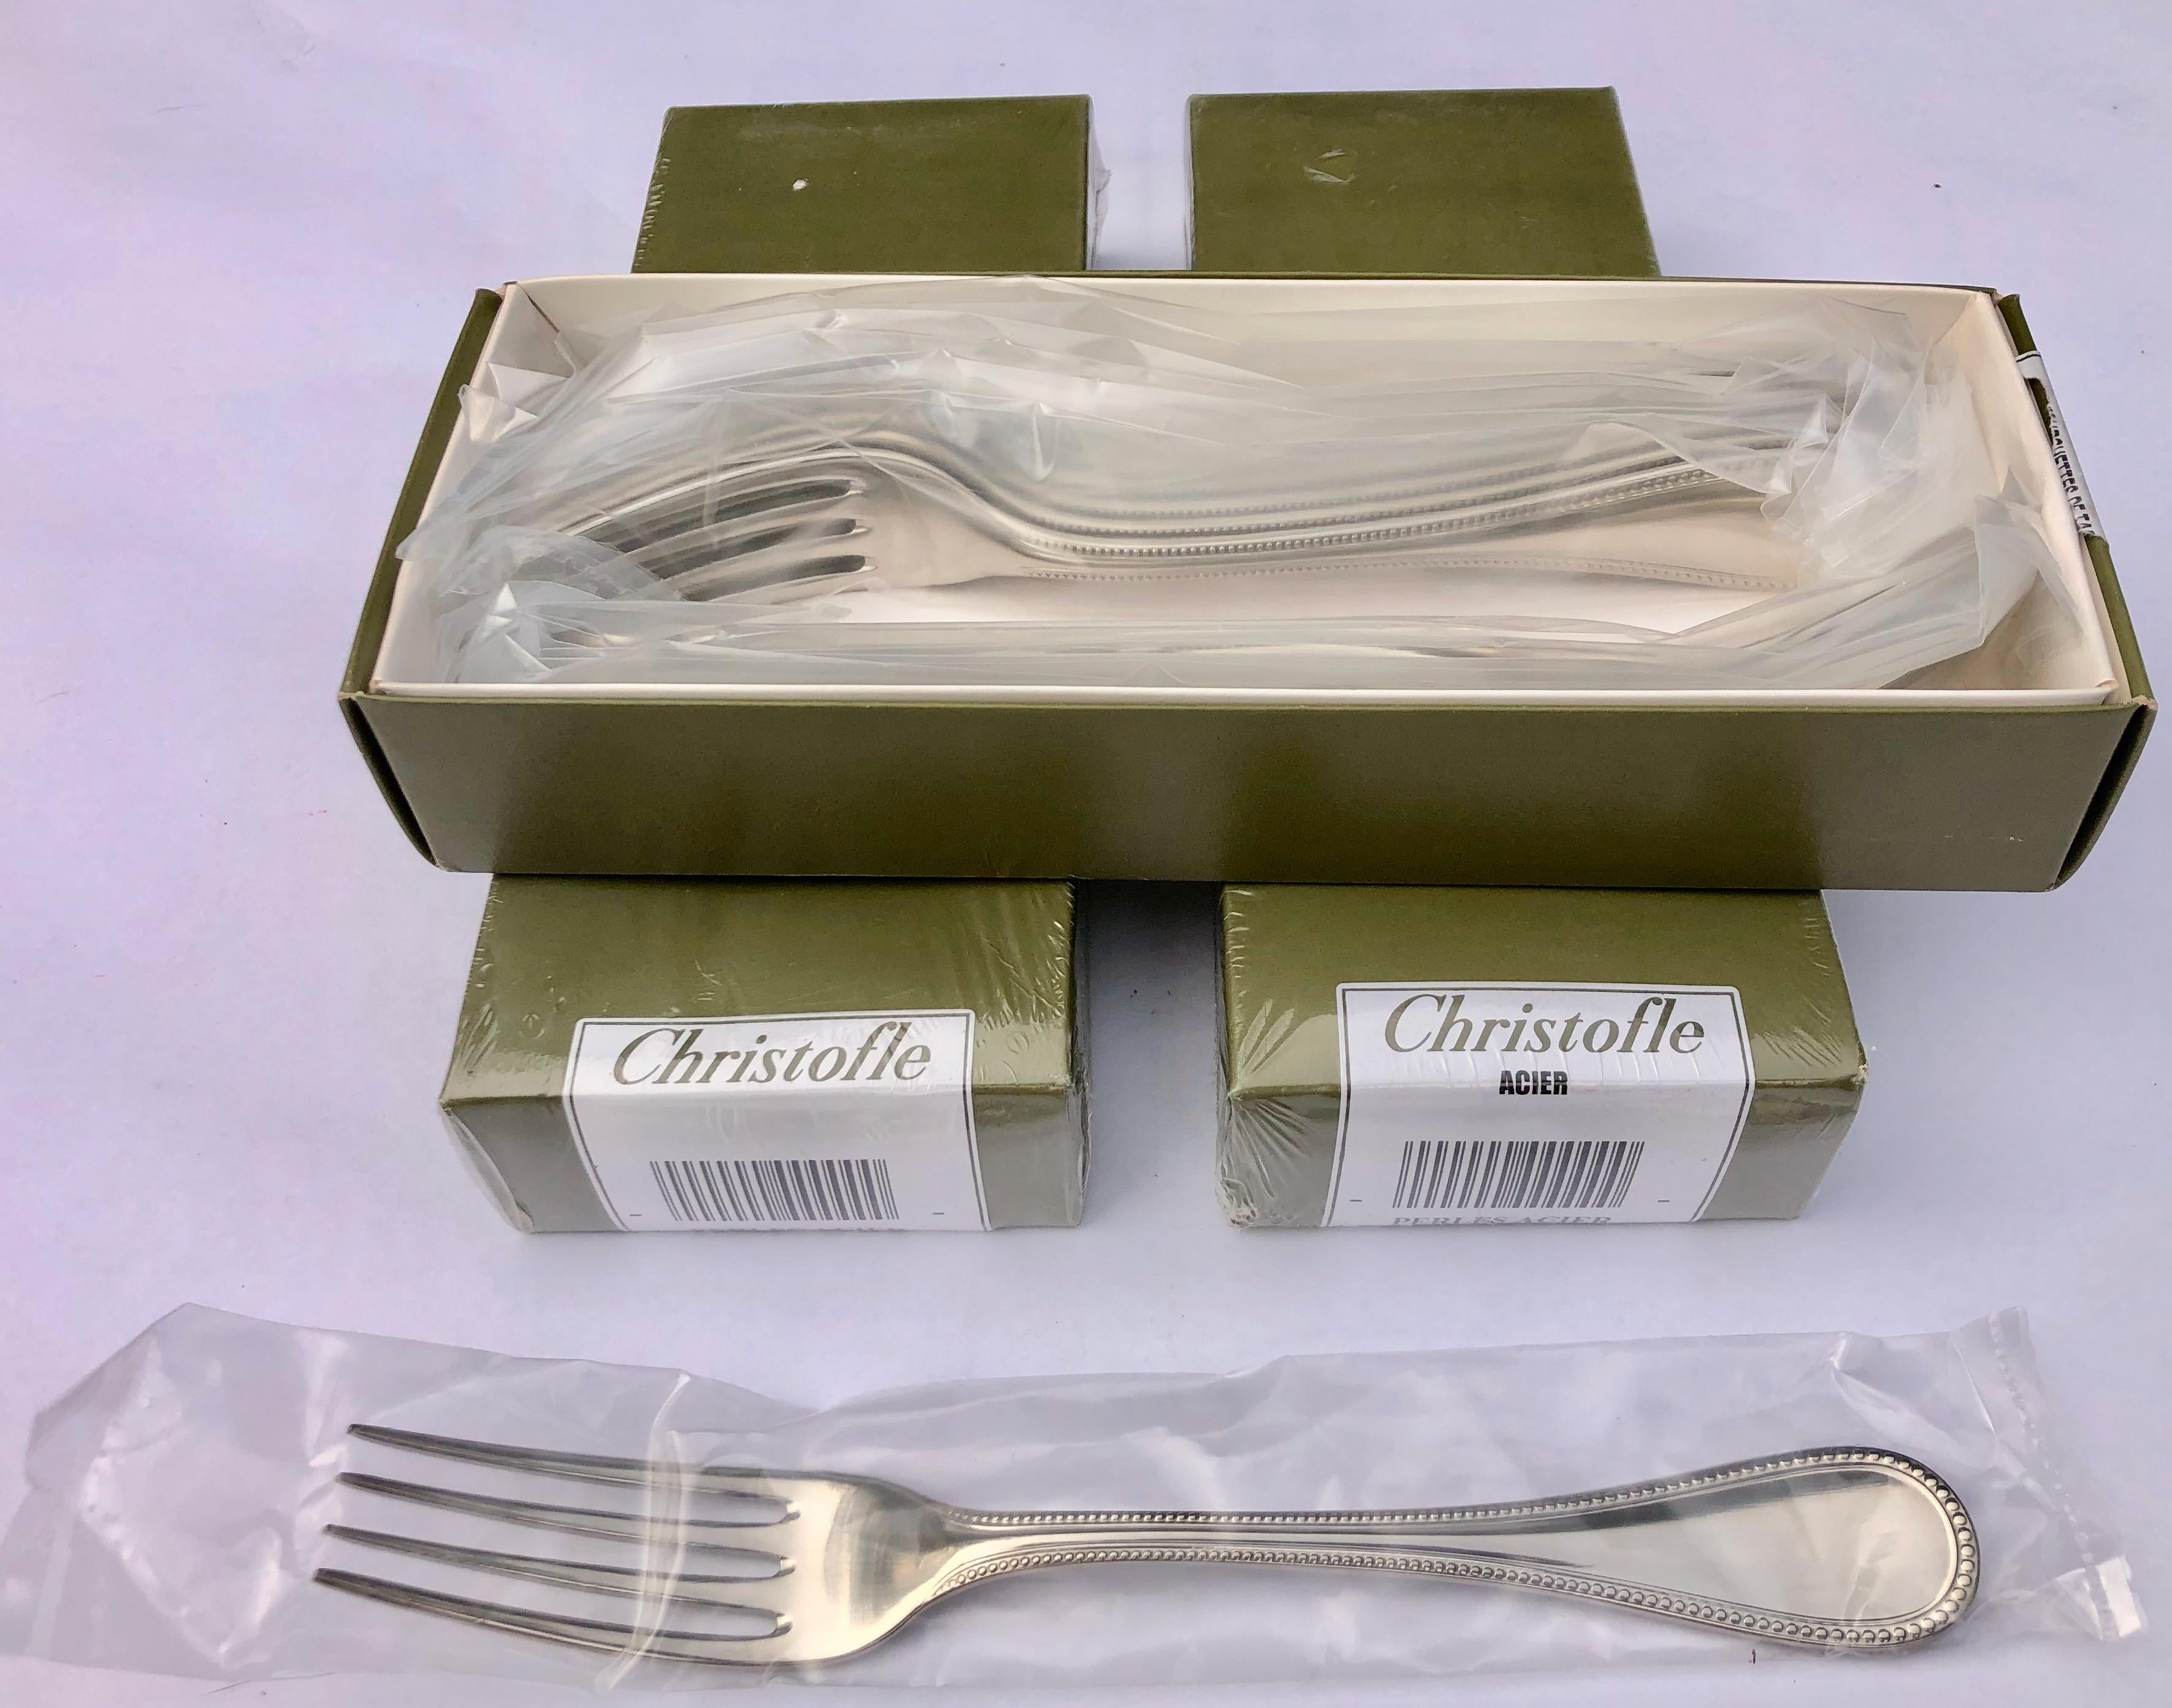 This French Christofle Perles stainless steel set consists of 162 pieces. All pieces are new and come in their original boxes in their original plastic covering.
3 Christofle boxes with 12 dinner forks (total 36) 21cm
3 Christofle boxes with 12